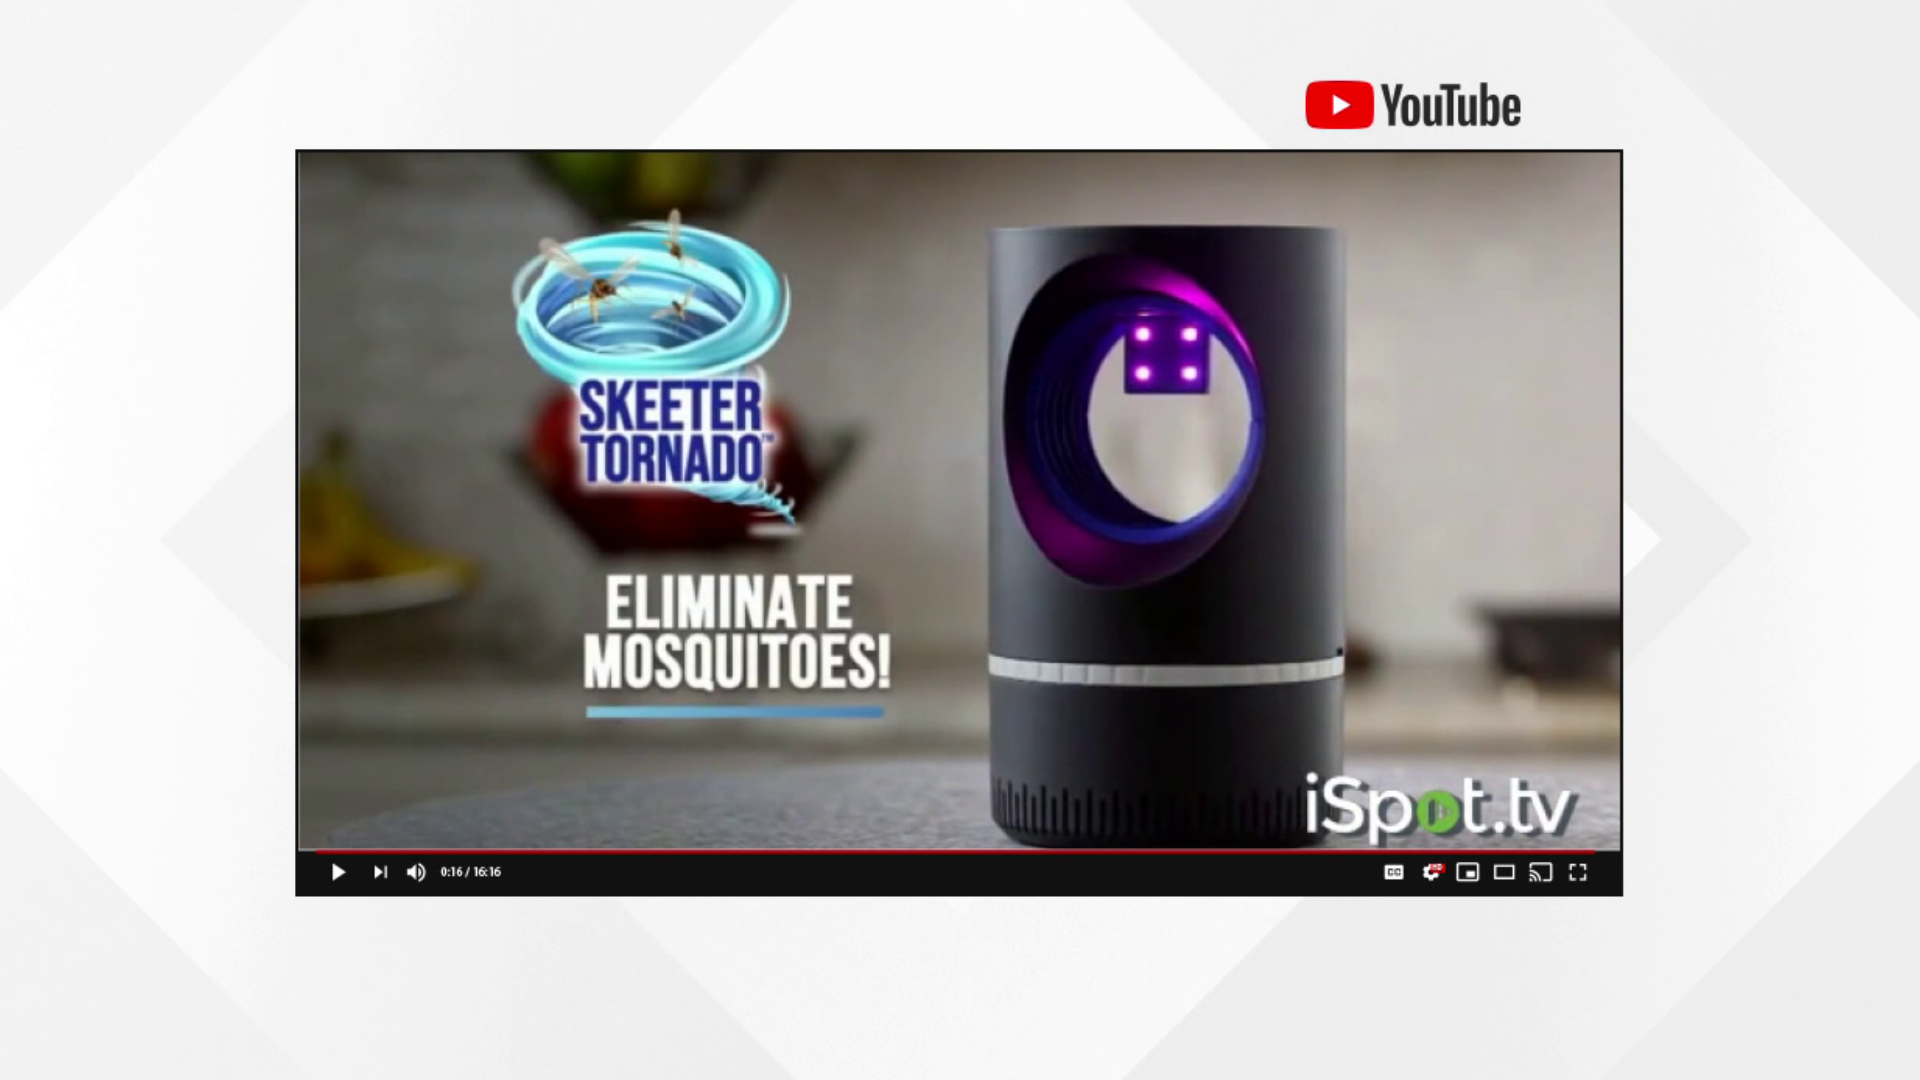 With all the rain, mosquitoes are particularly bad. Will the Skeeter Tornado solve all of our bug problems?